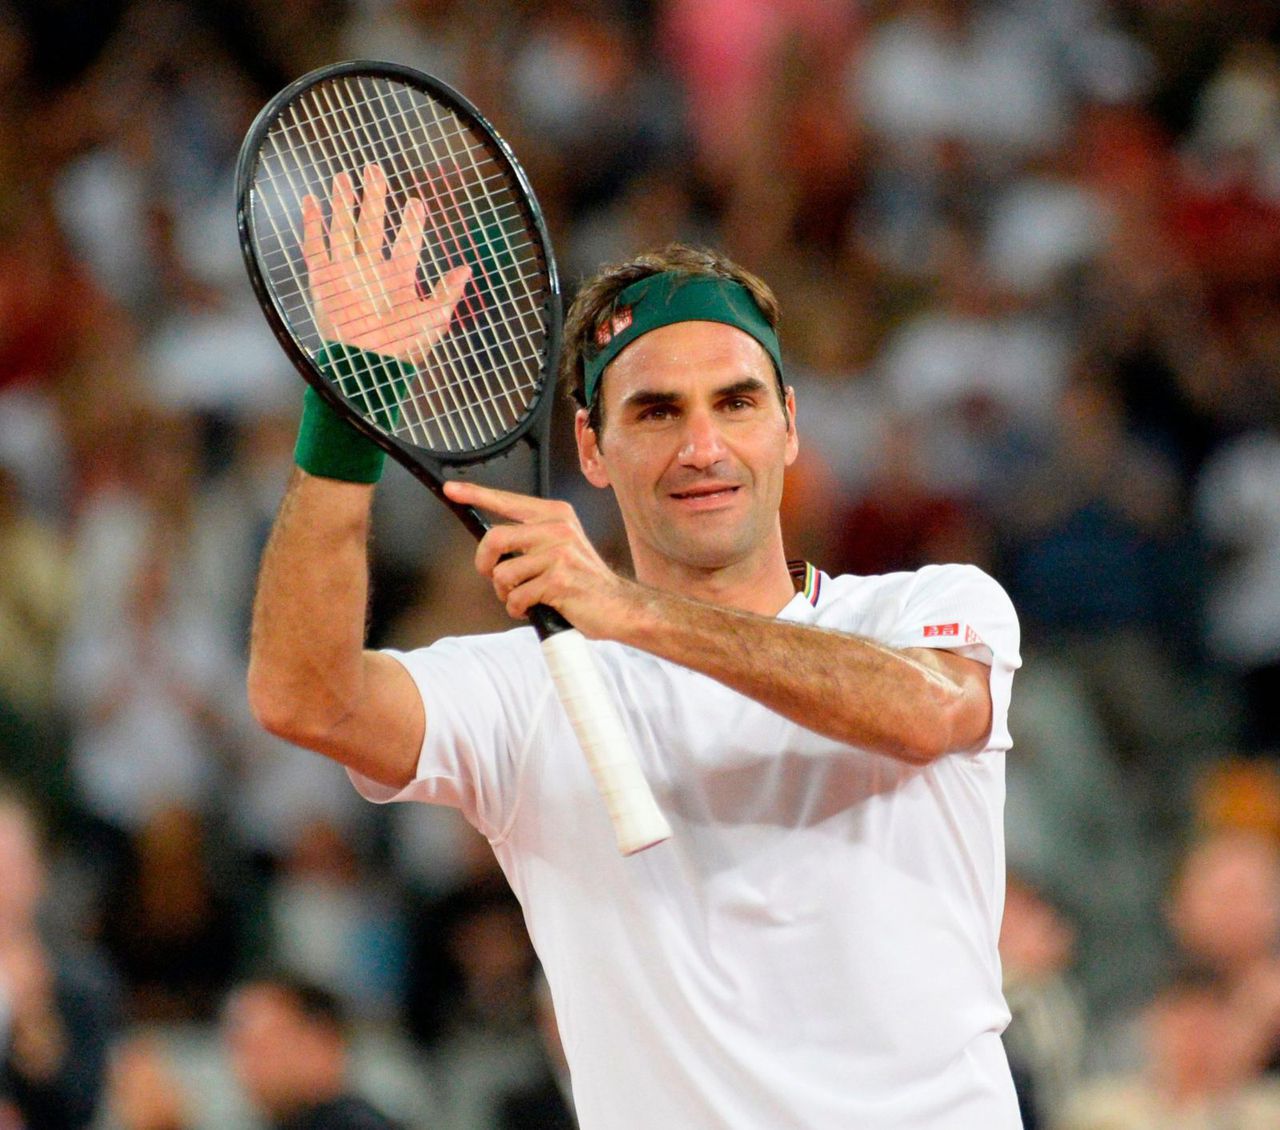 Roger Federer tops the 2020 list of highest-paid athletes